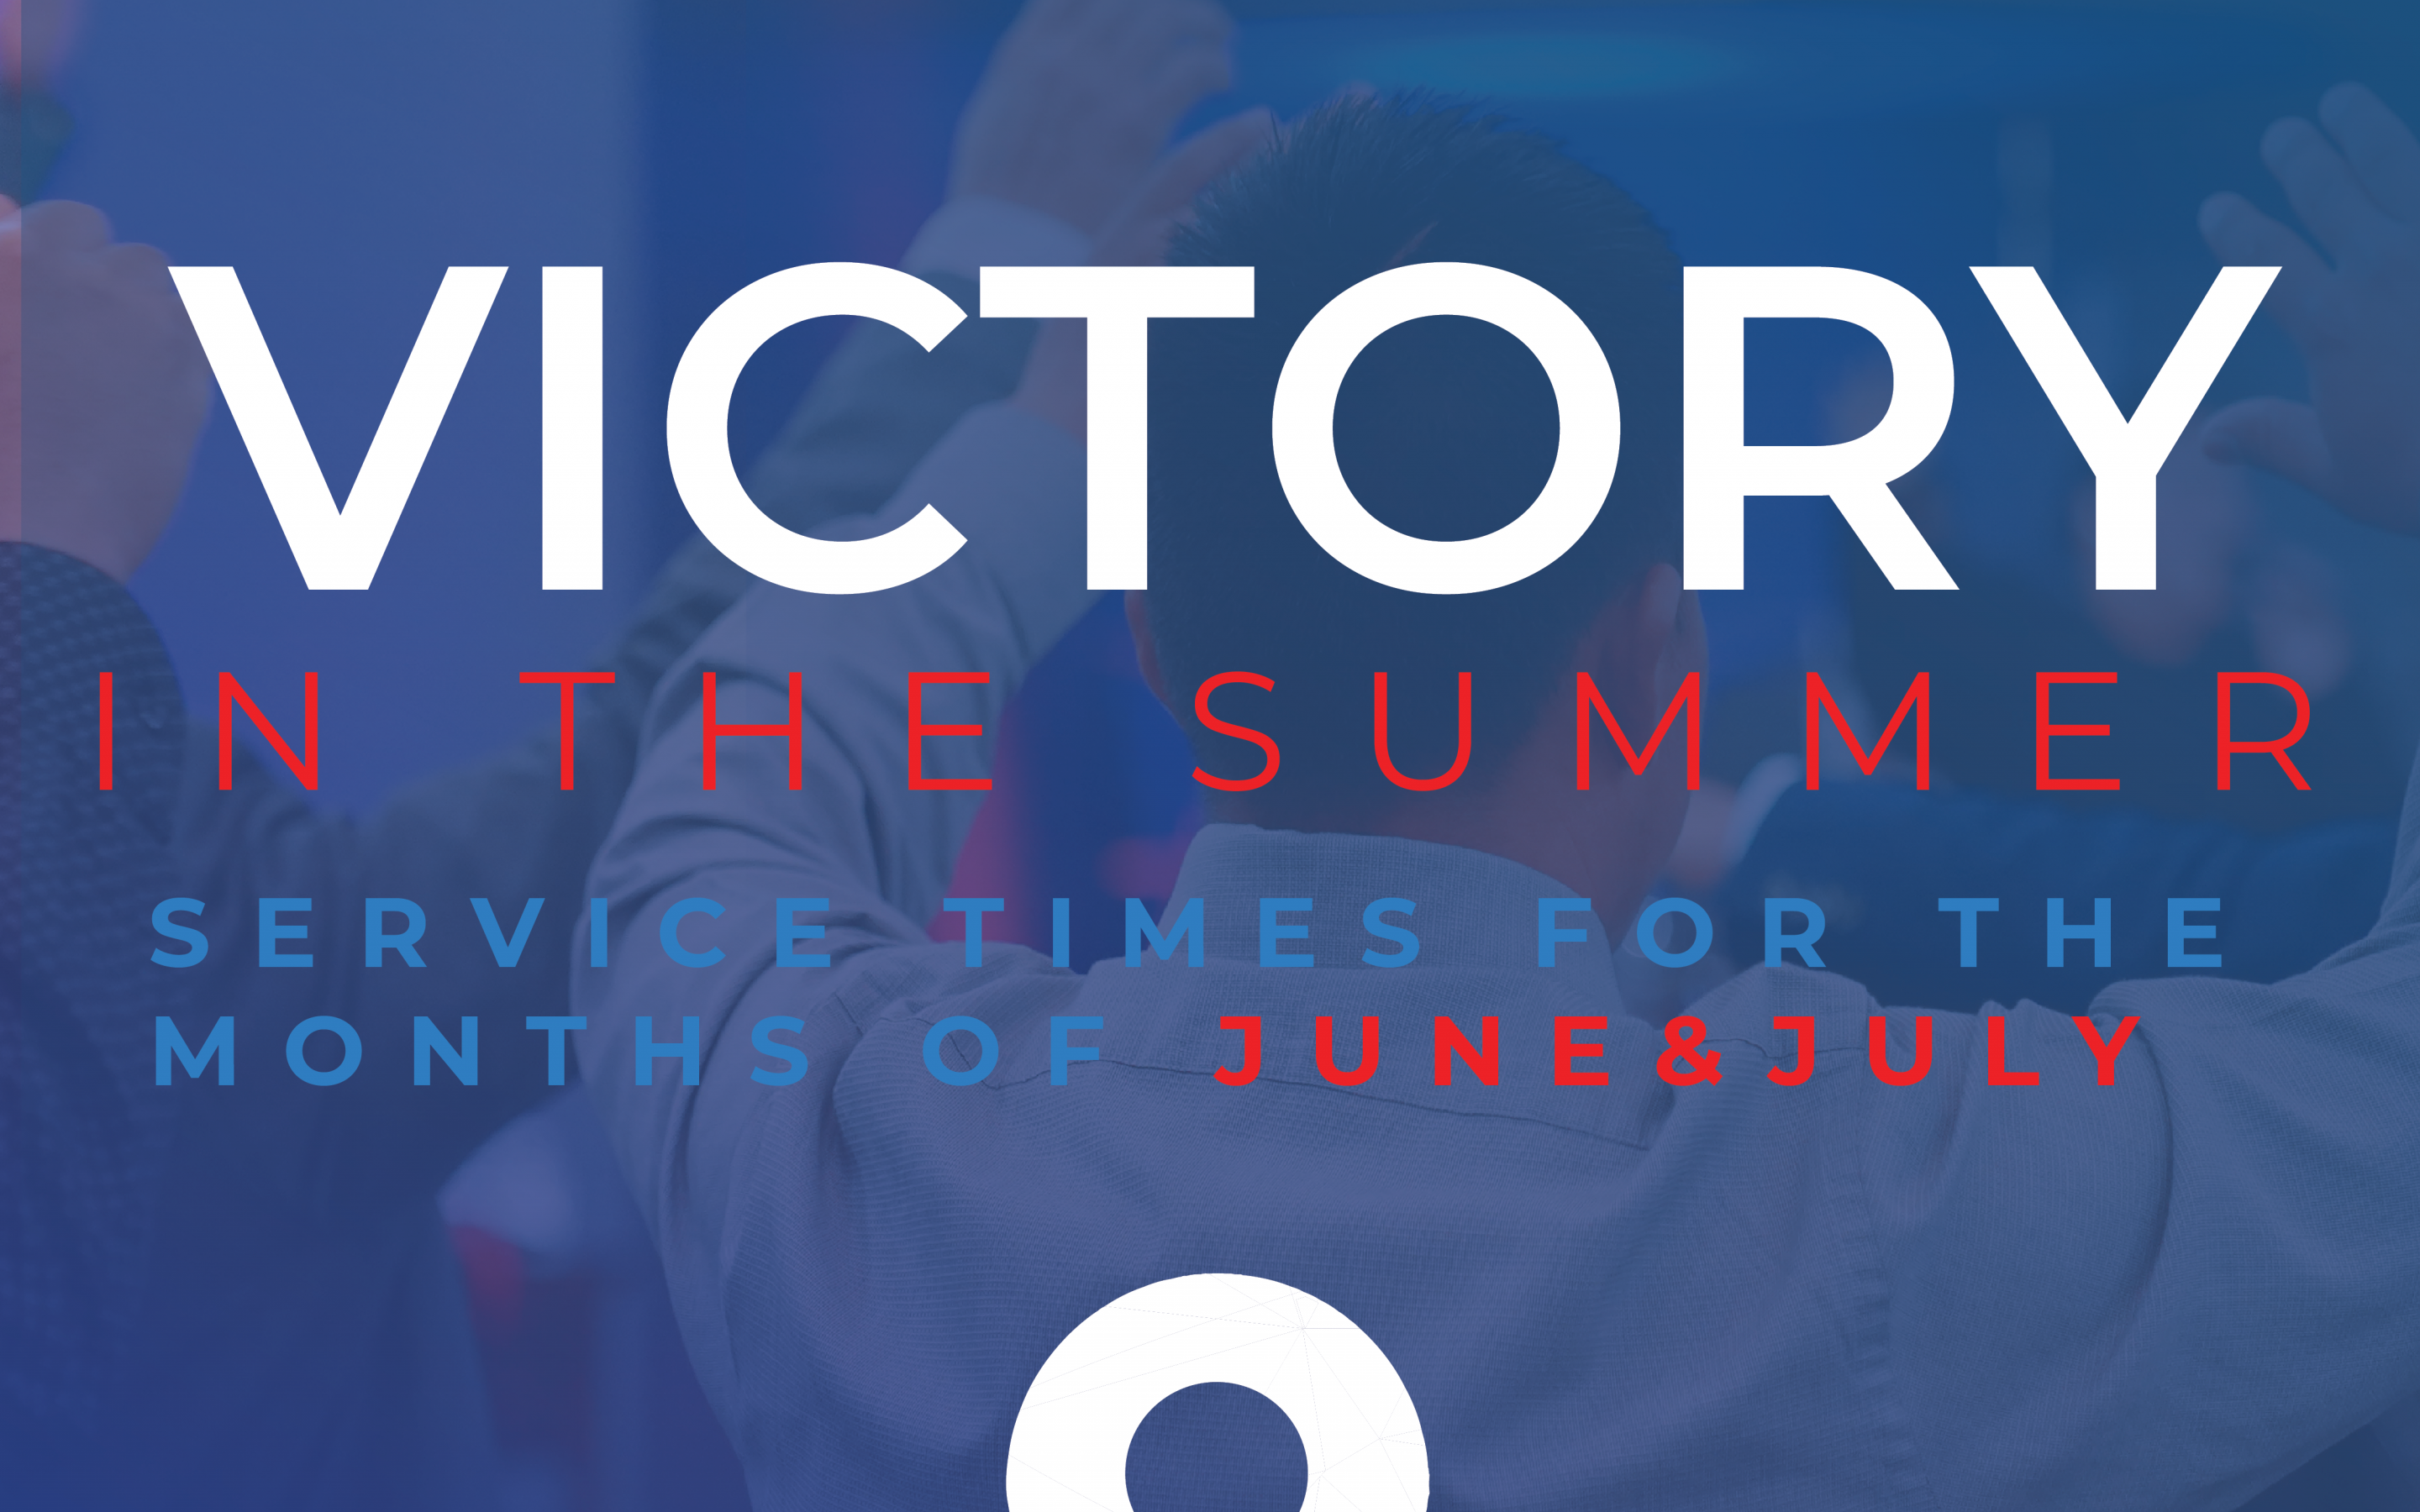 VICTORY IN THE SUMMER